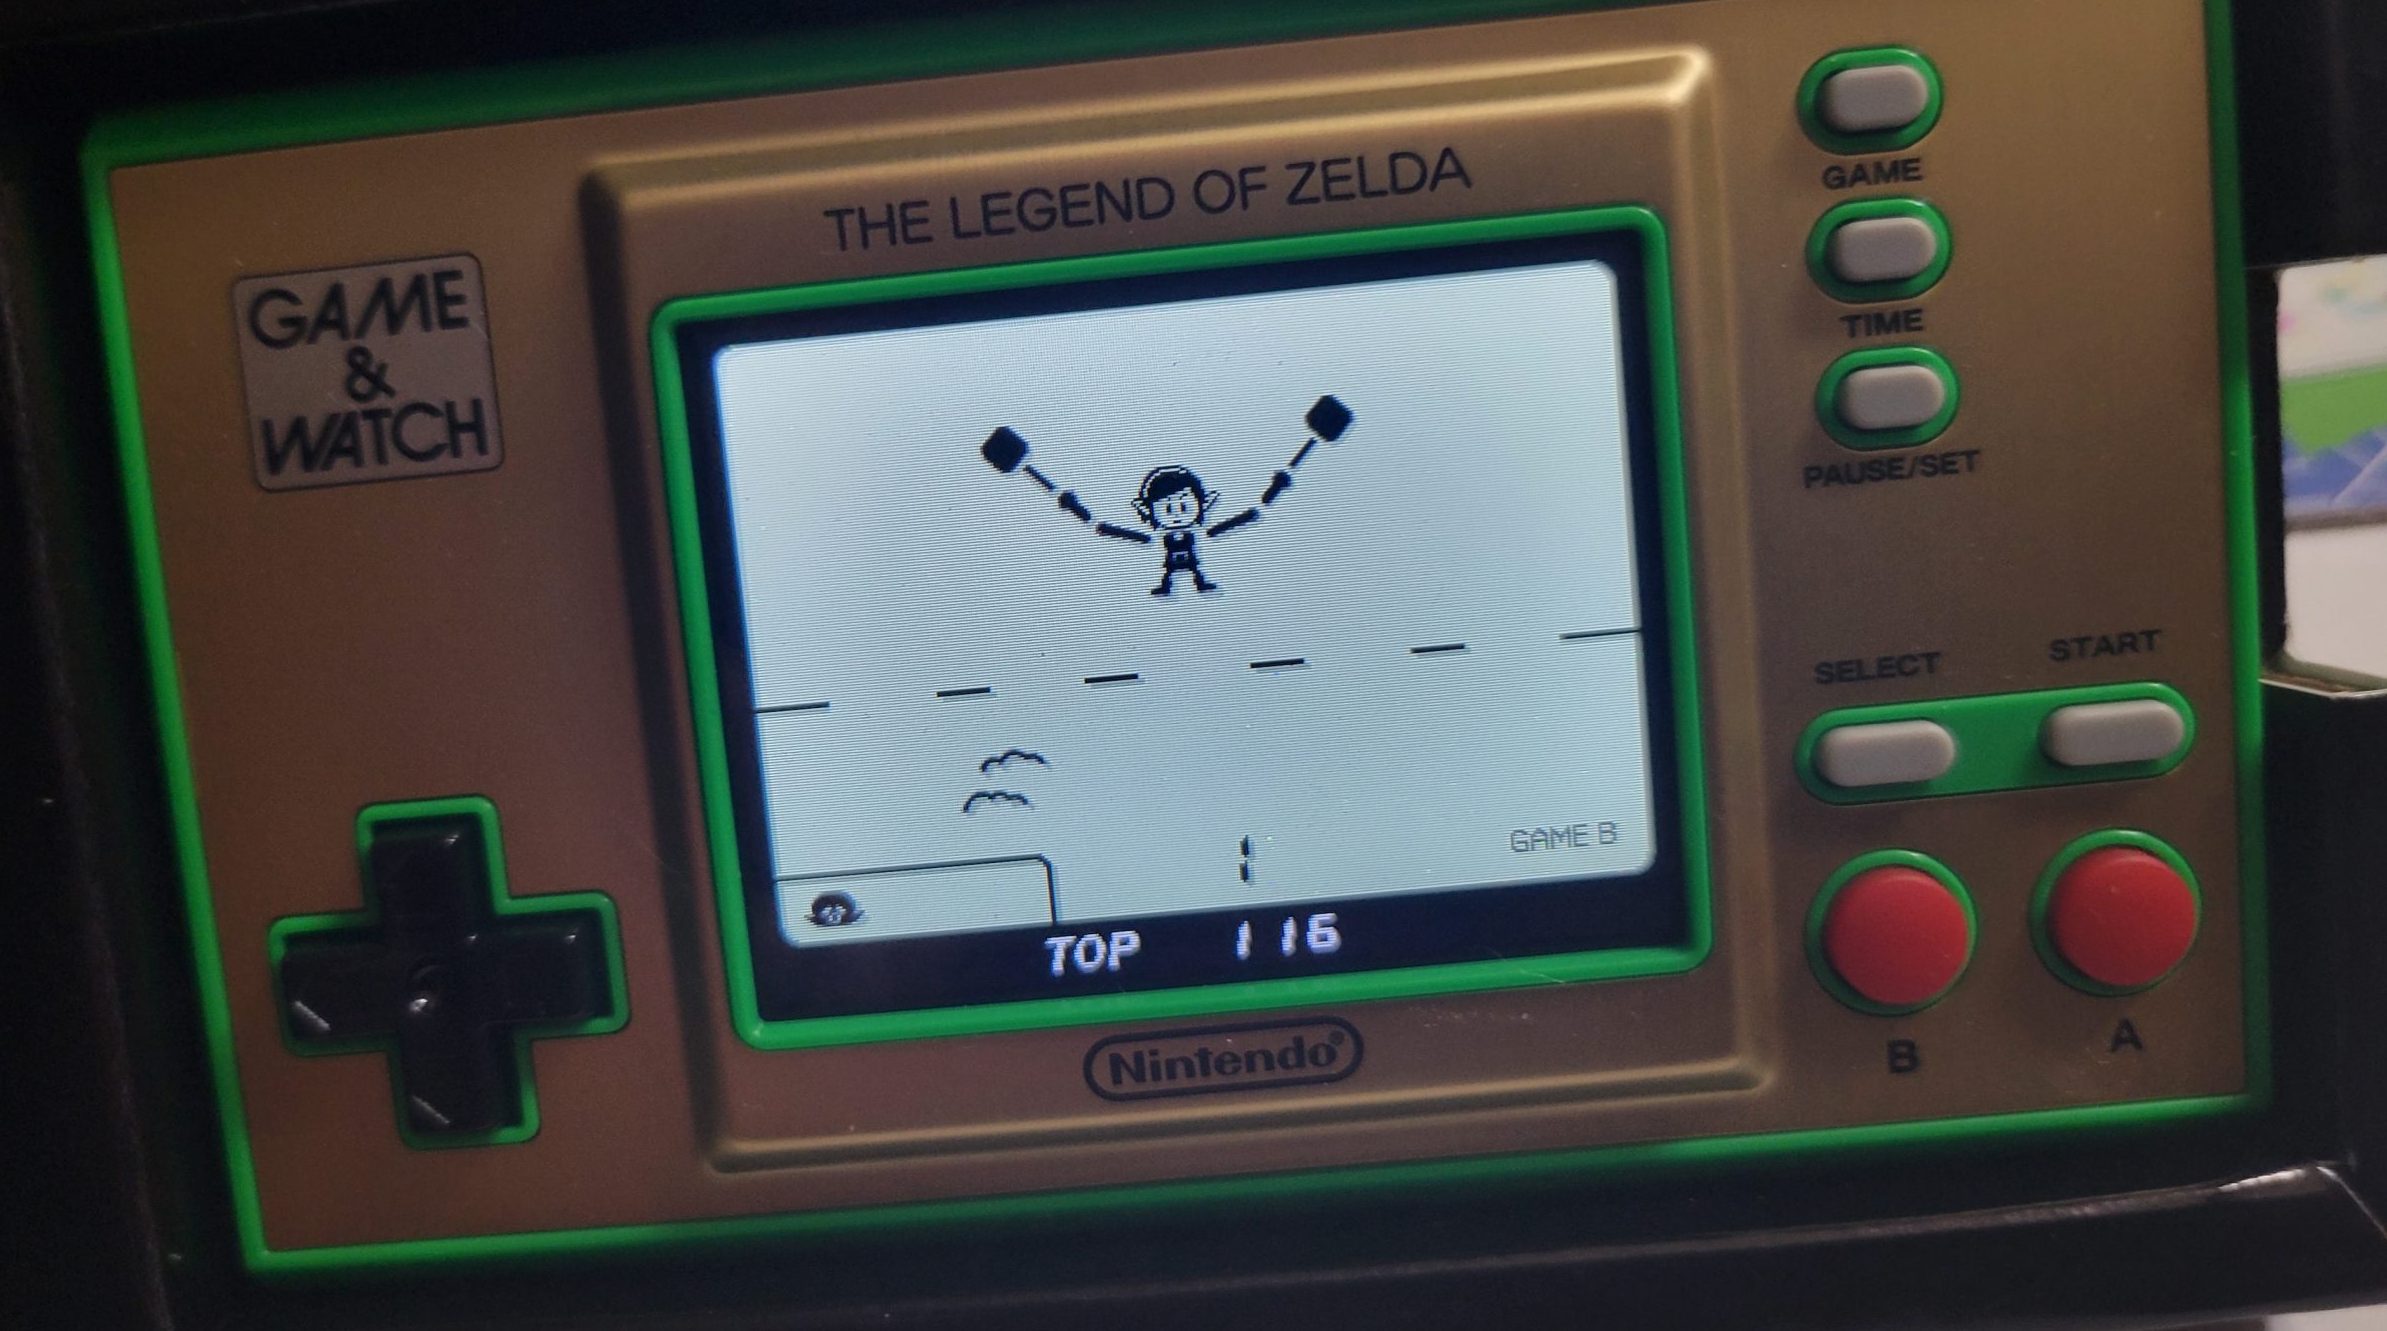 Game & Watch: Legend of Zelda Anniversary Edition review – the hero of time  now tells the time